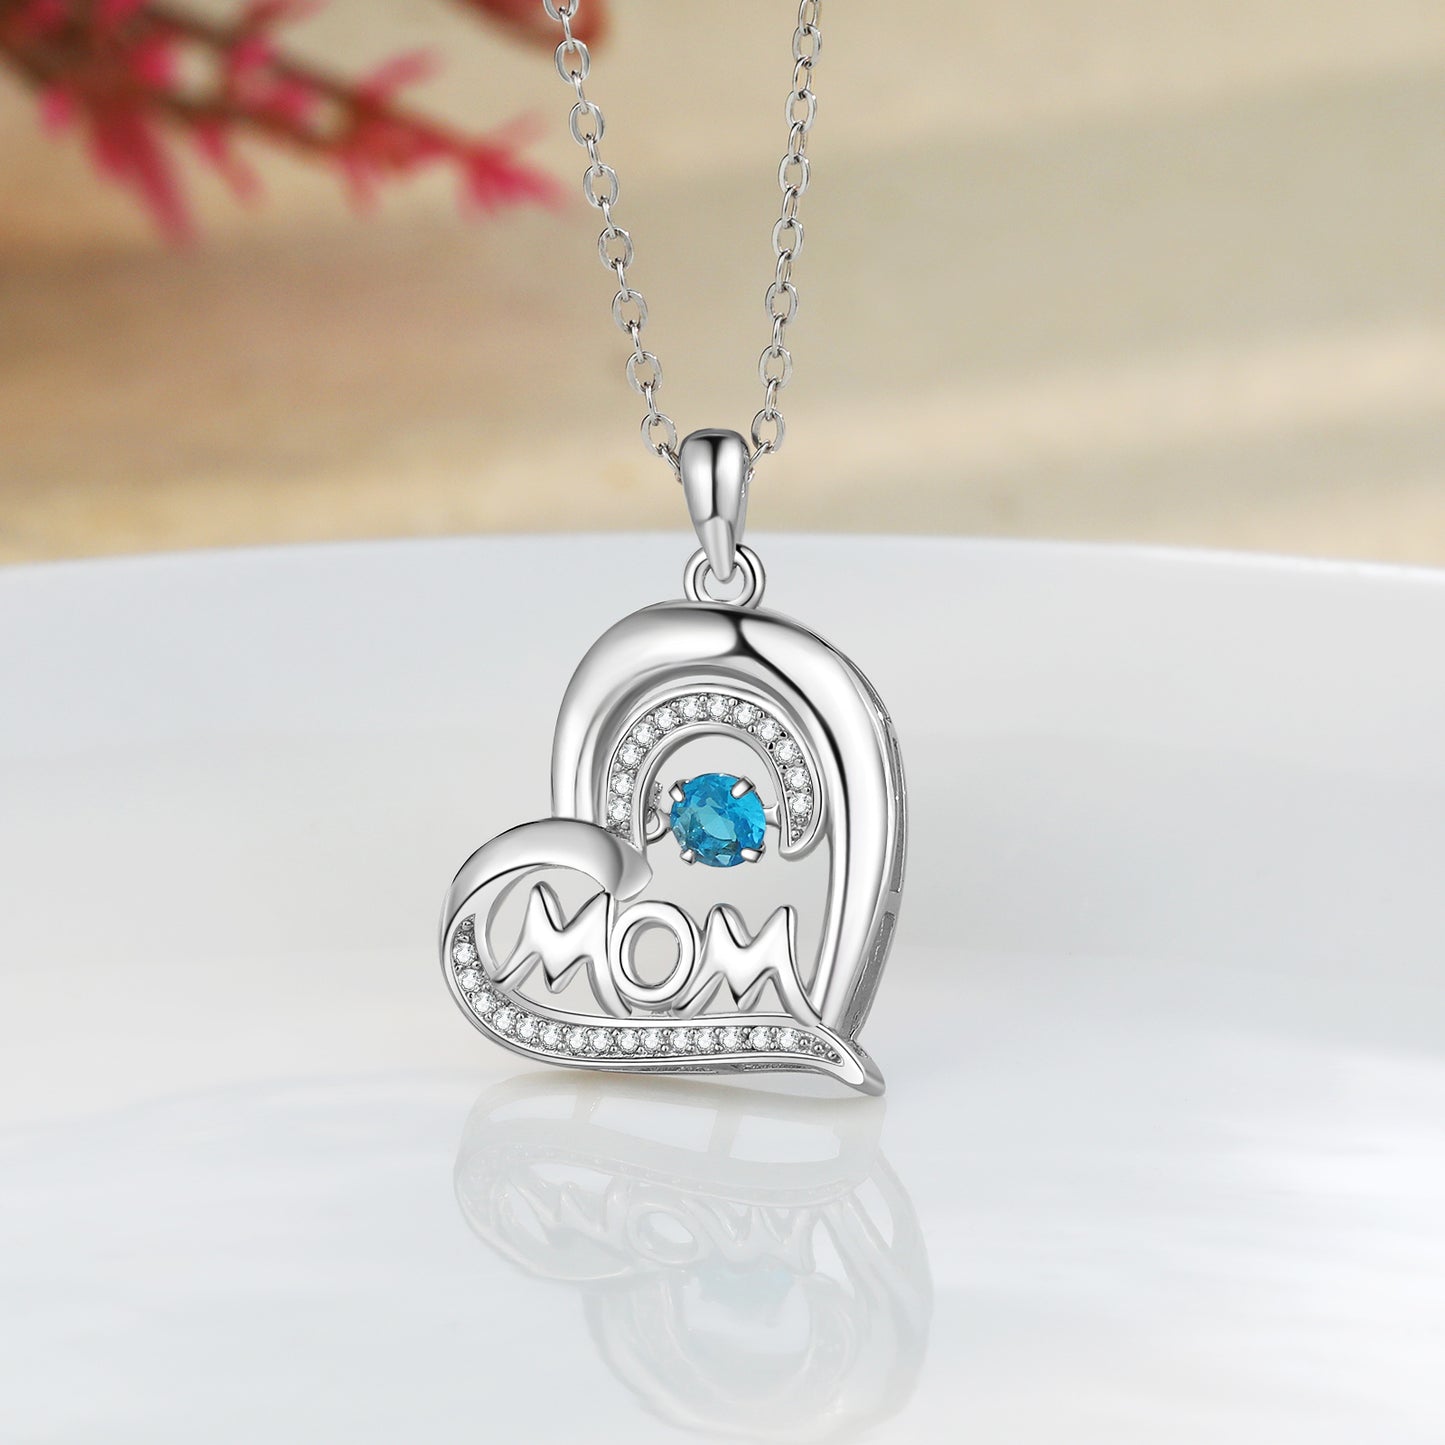 Custom Heart Necklace with MOM